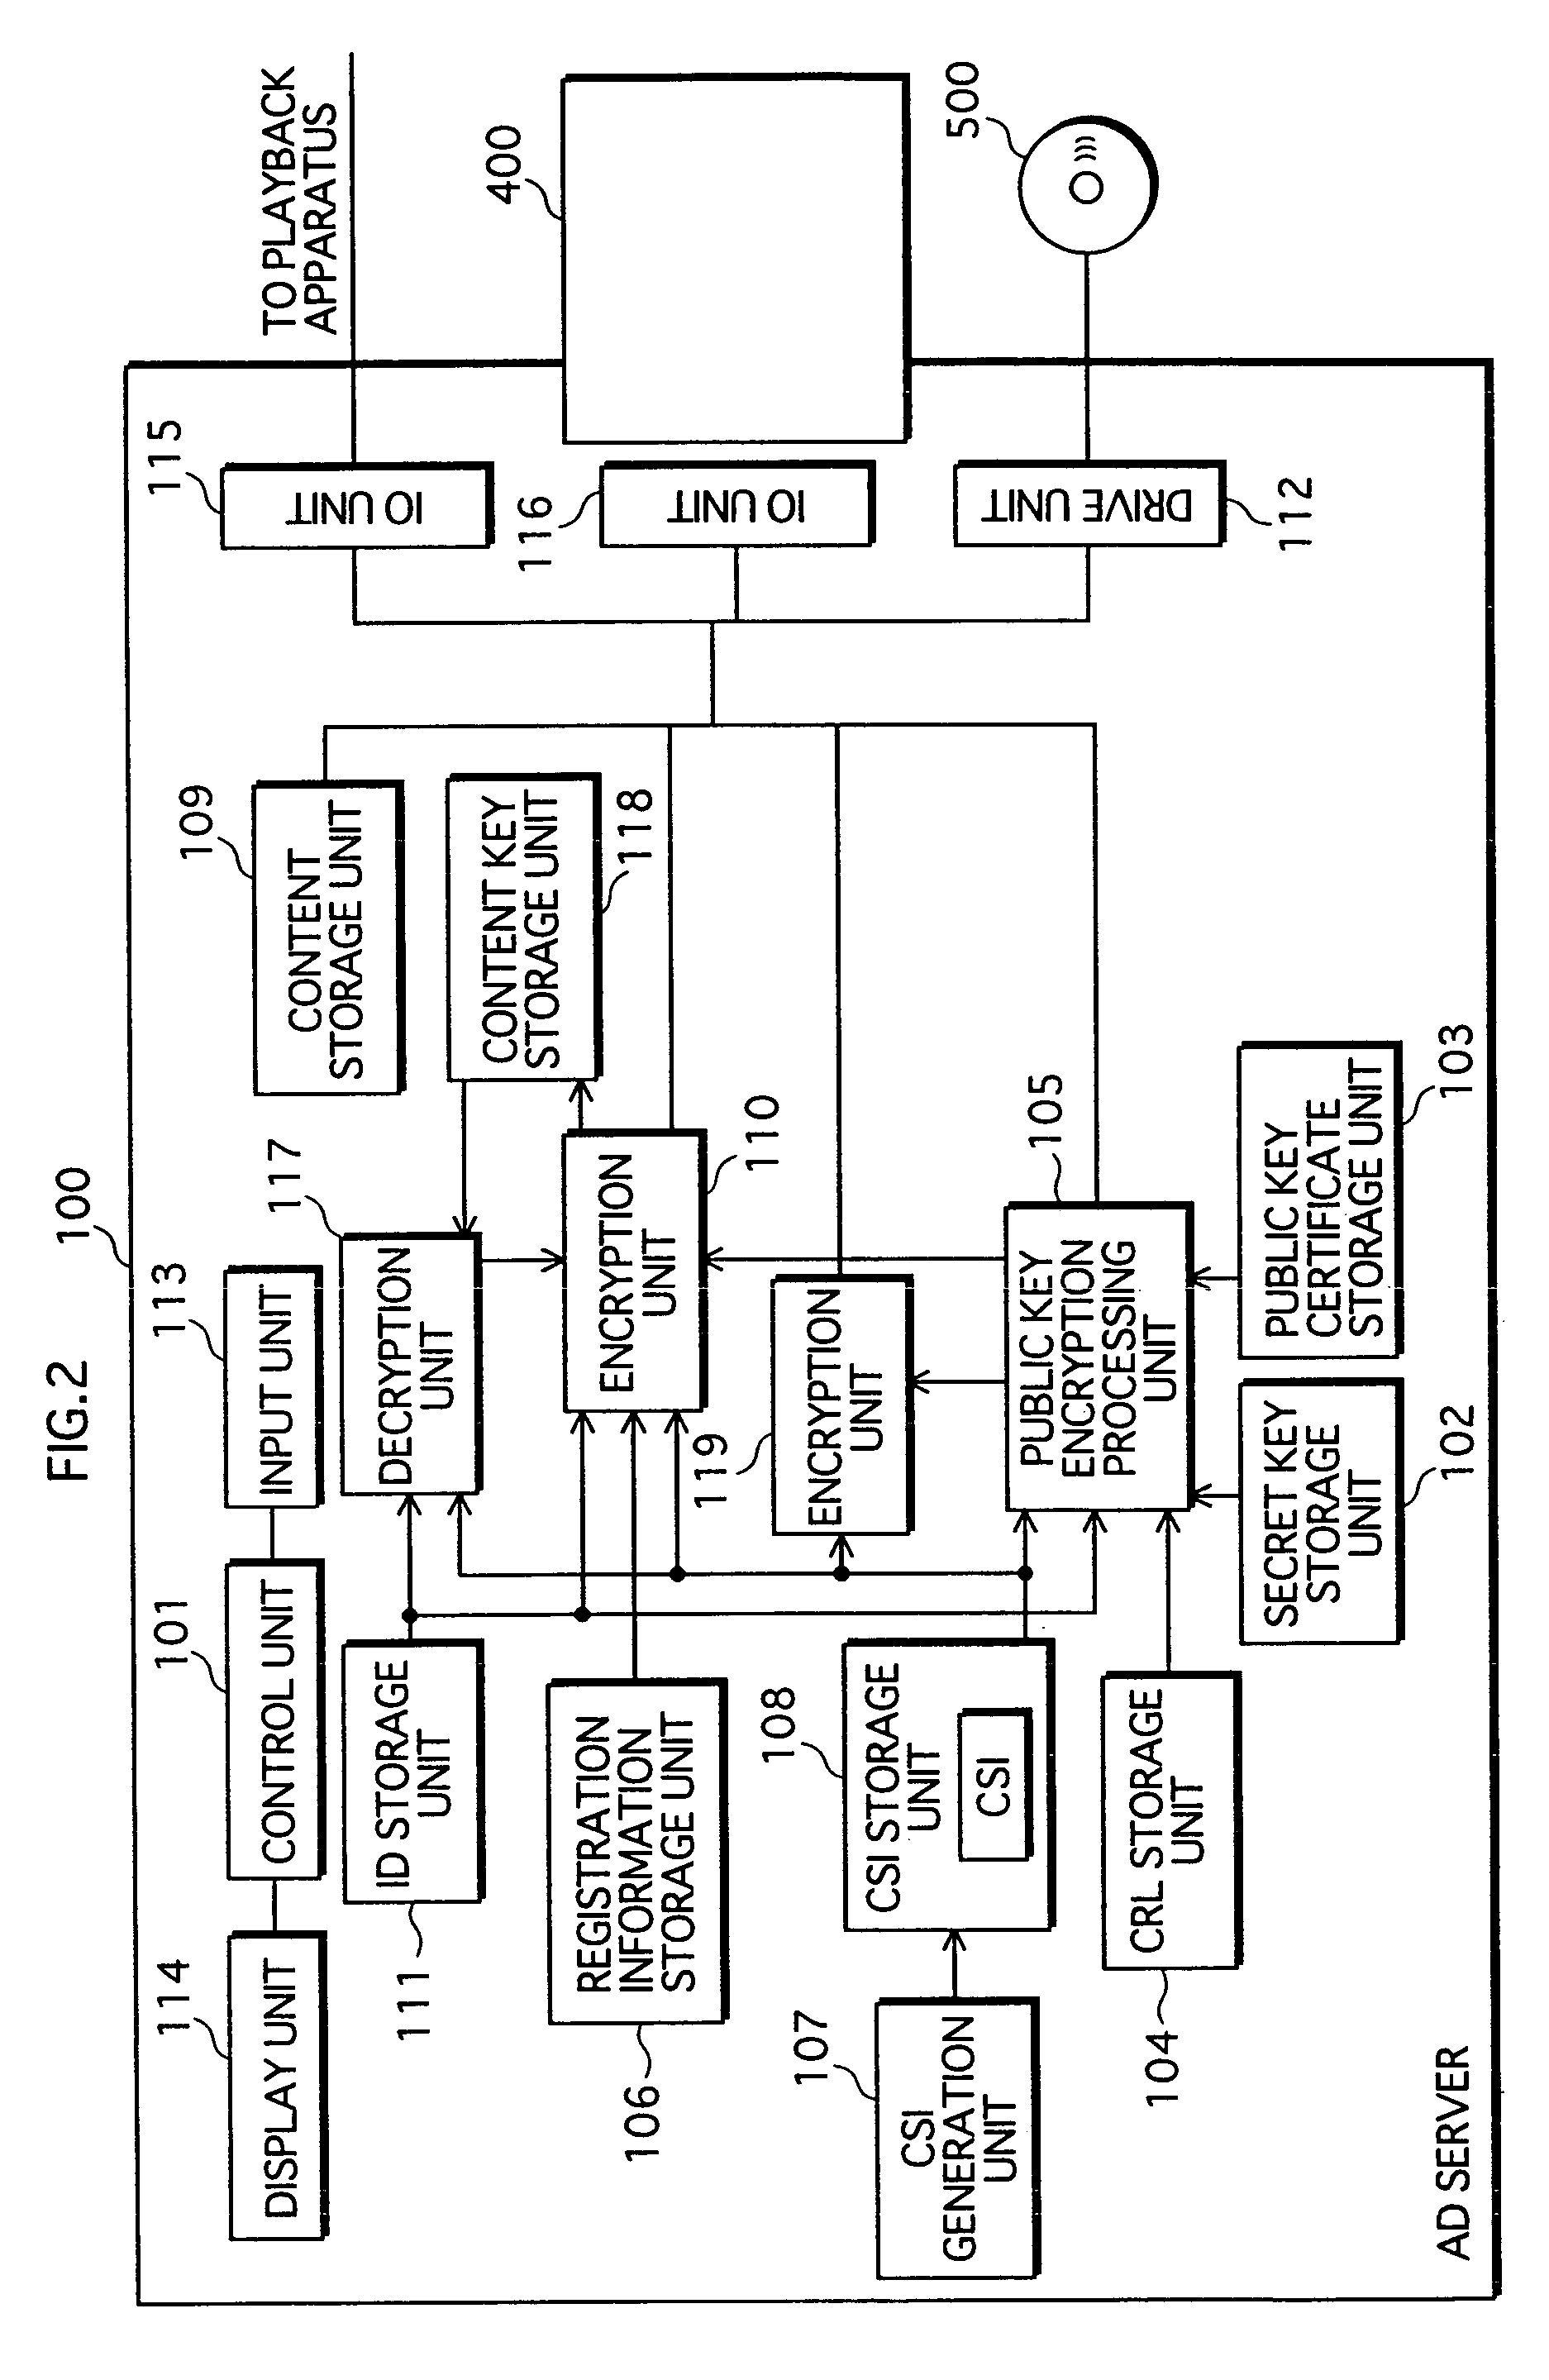 Content duplication management system and networked apparatus